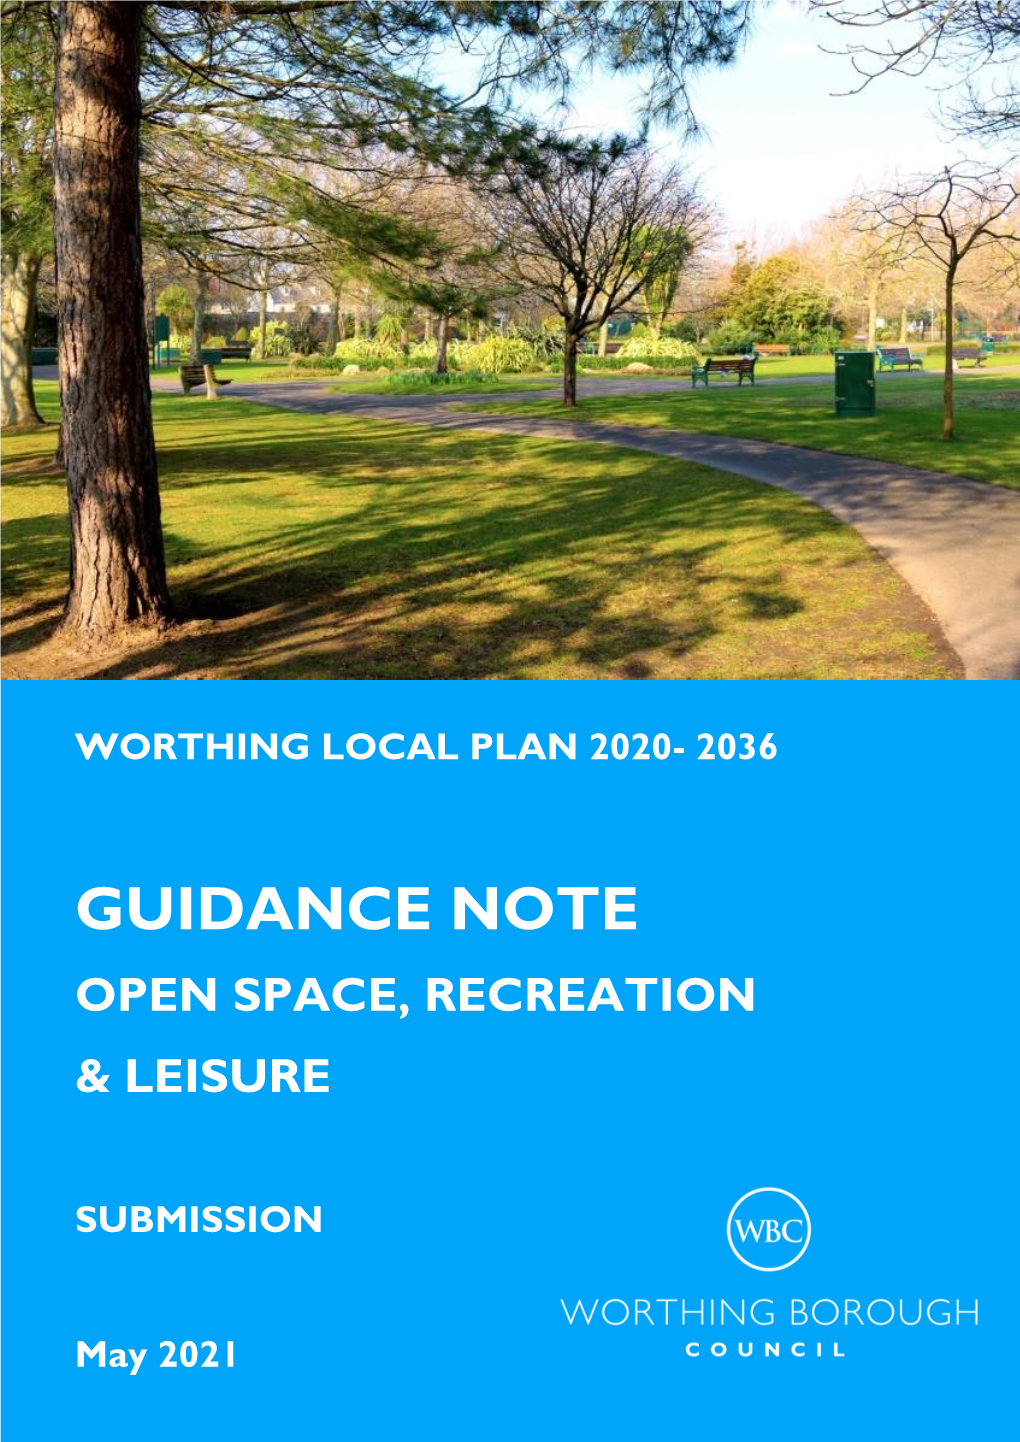 Open Space, Recreation & Leisure Guidance Note